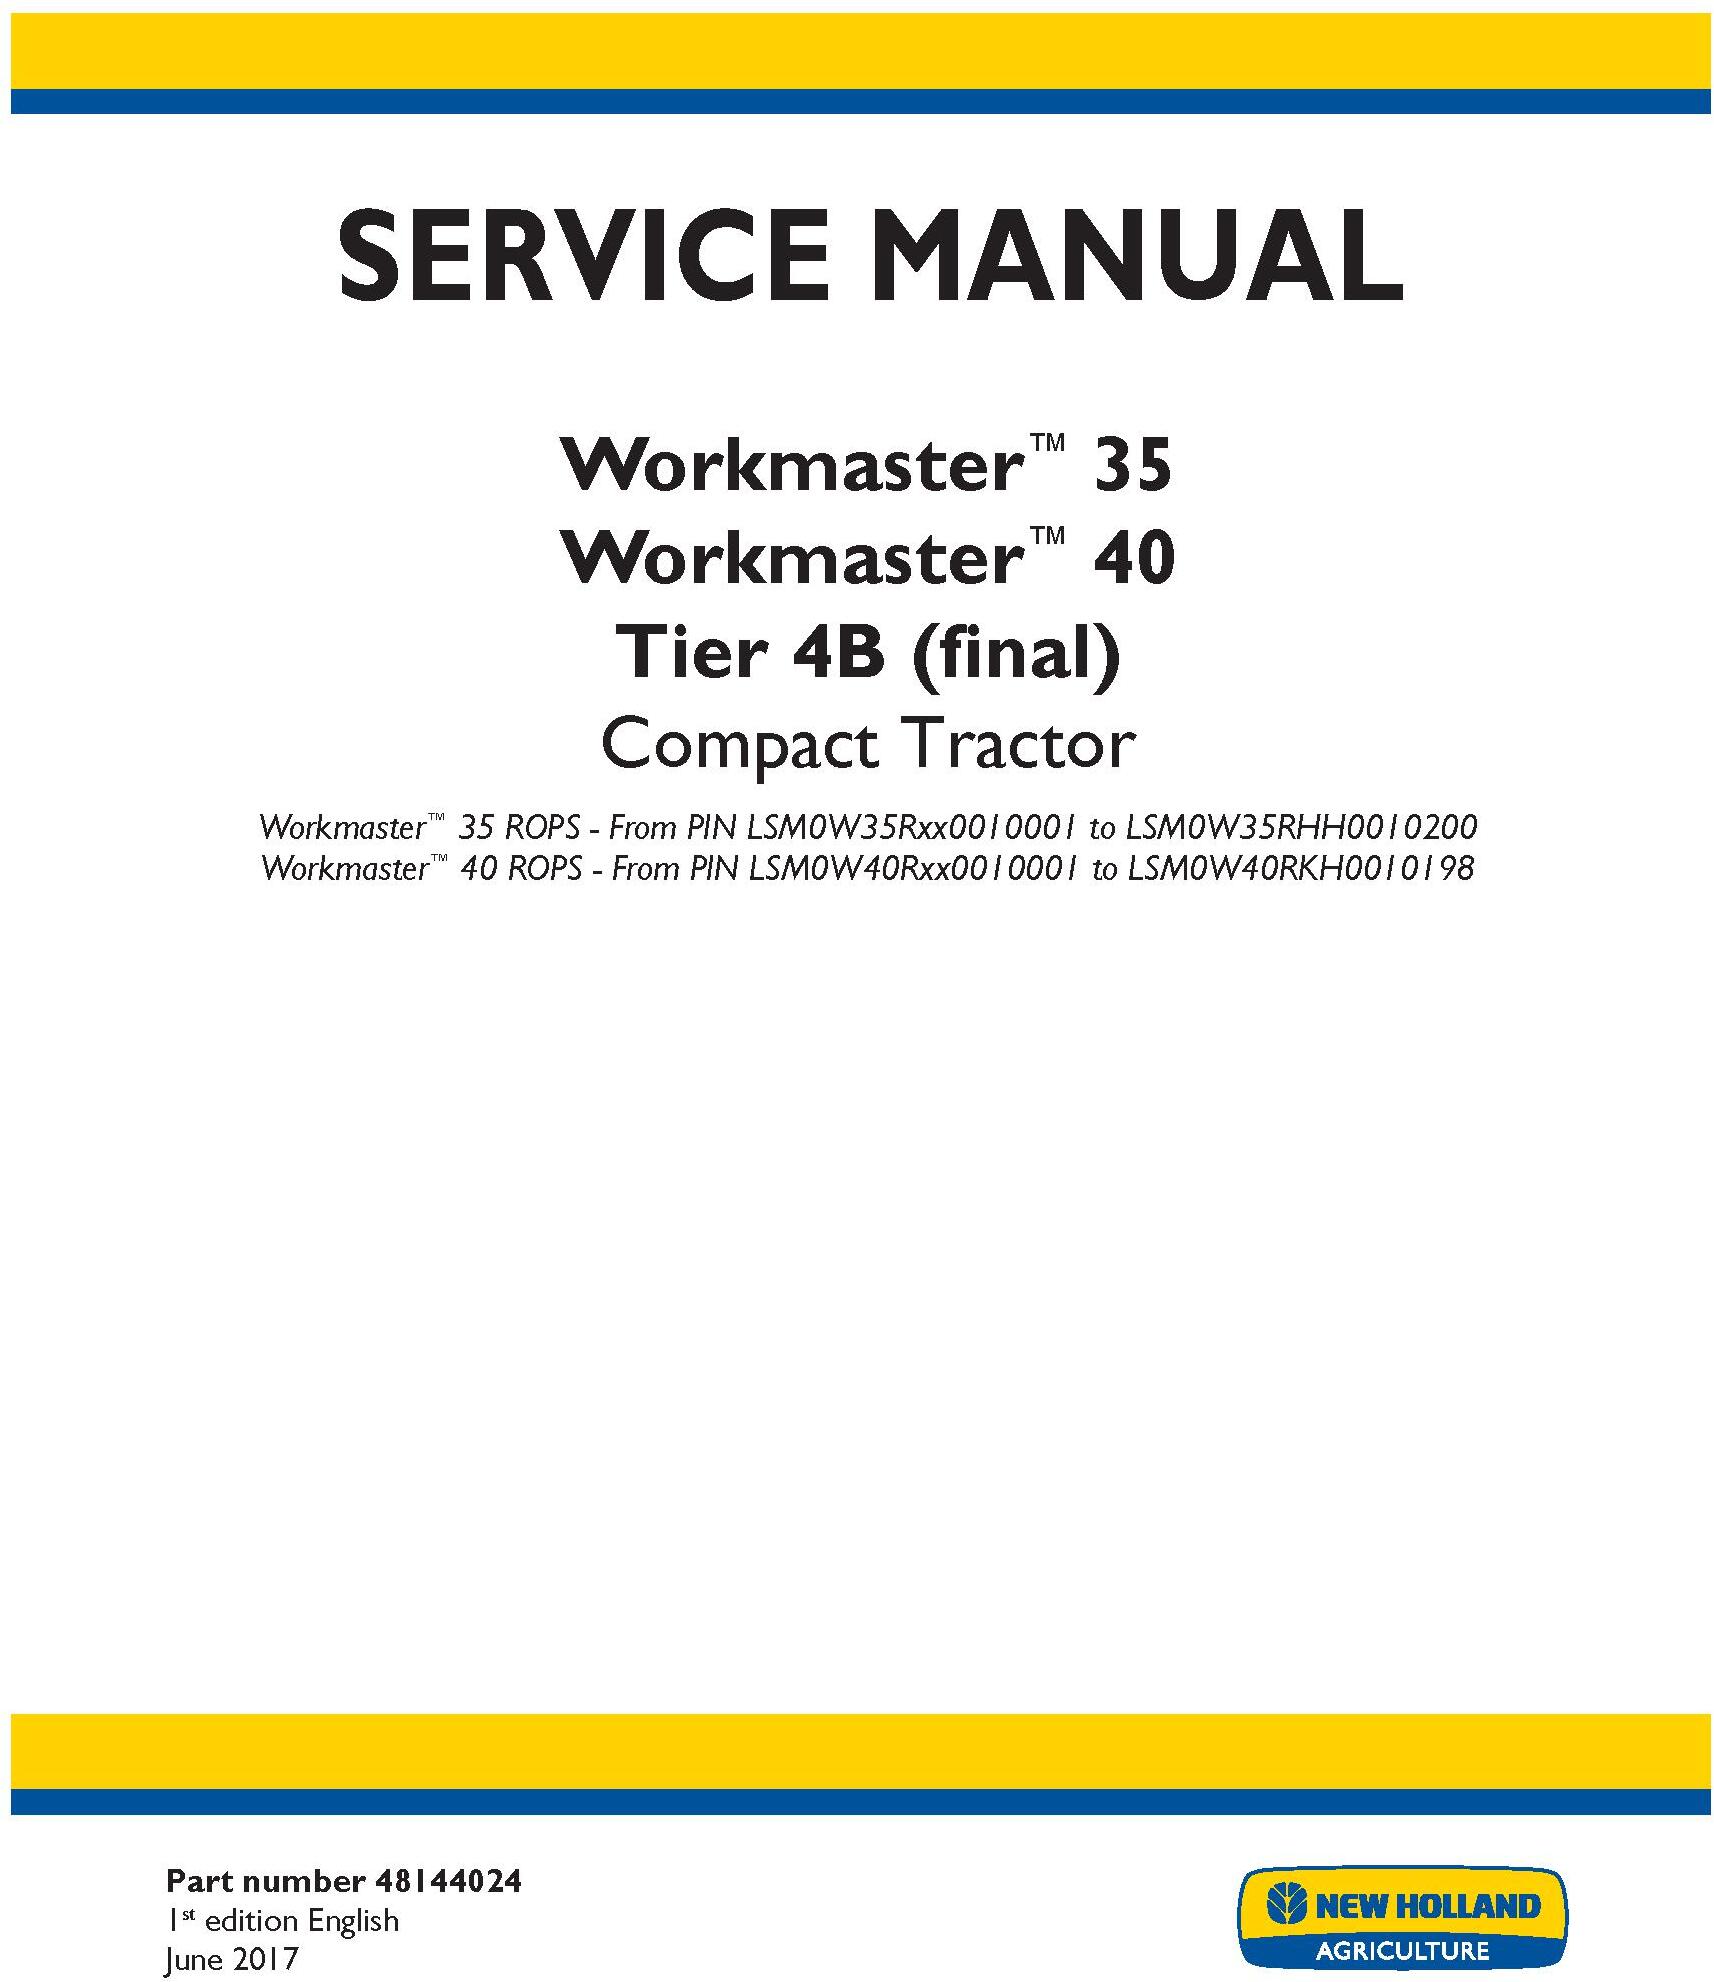 New Holland Workmaster 35, Workmaster 40 ROPS Tier 4B final Compact Tractor Service Manual (USA)